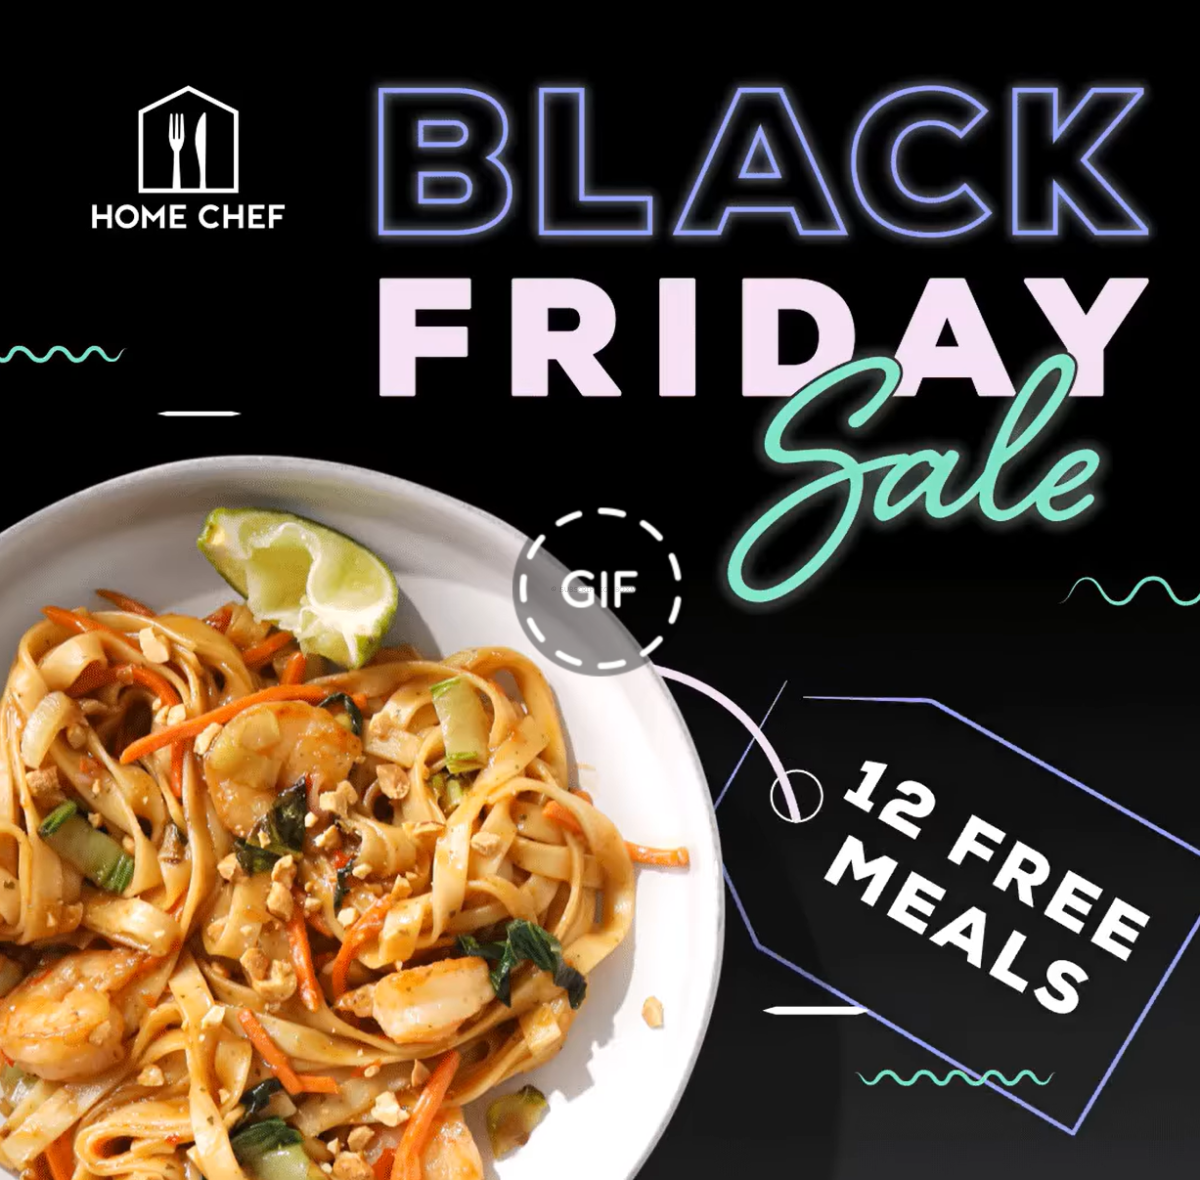 Home Chef Black Friday 2021 Deal